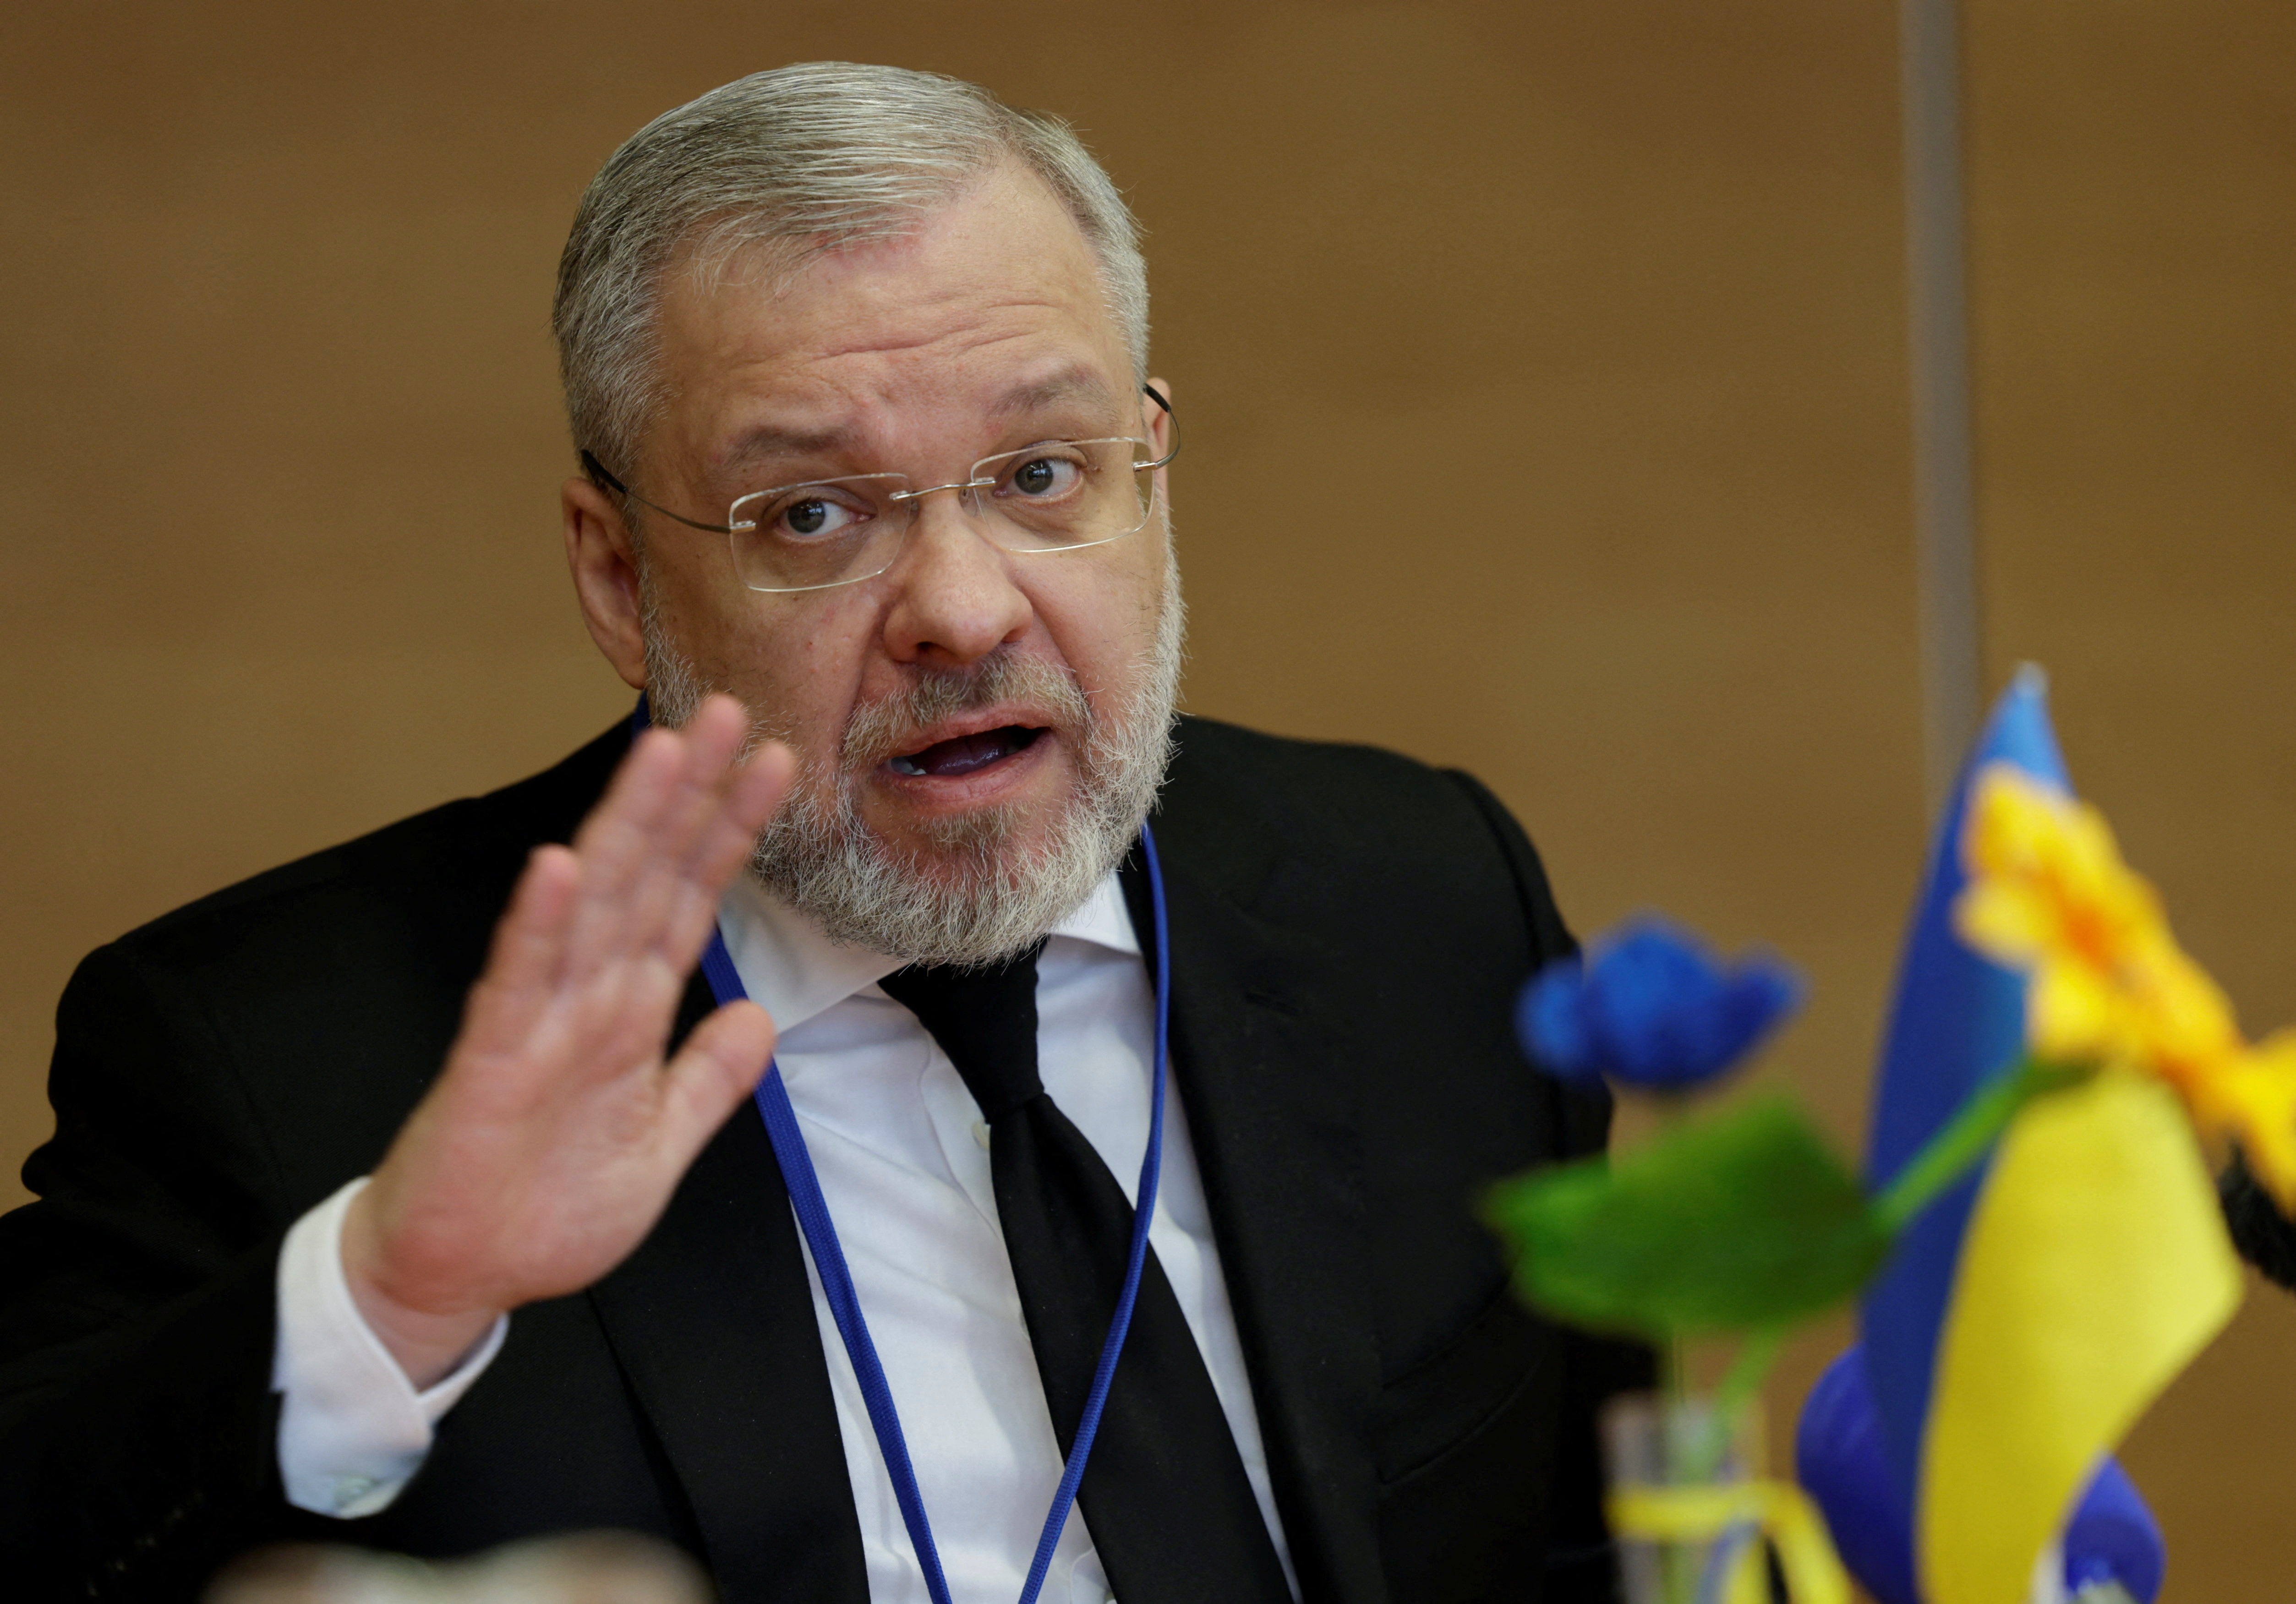 Ukrainian Energy Minister German Galushchenko attends a press conference at the U.N. nuclear watchdog IAEA in Vienna